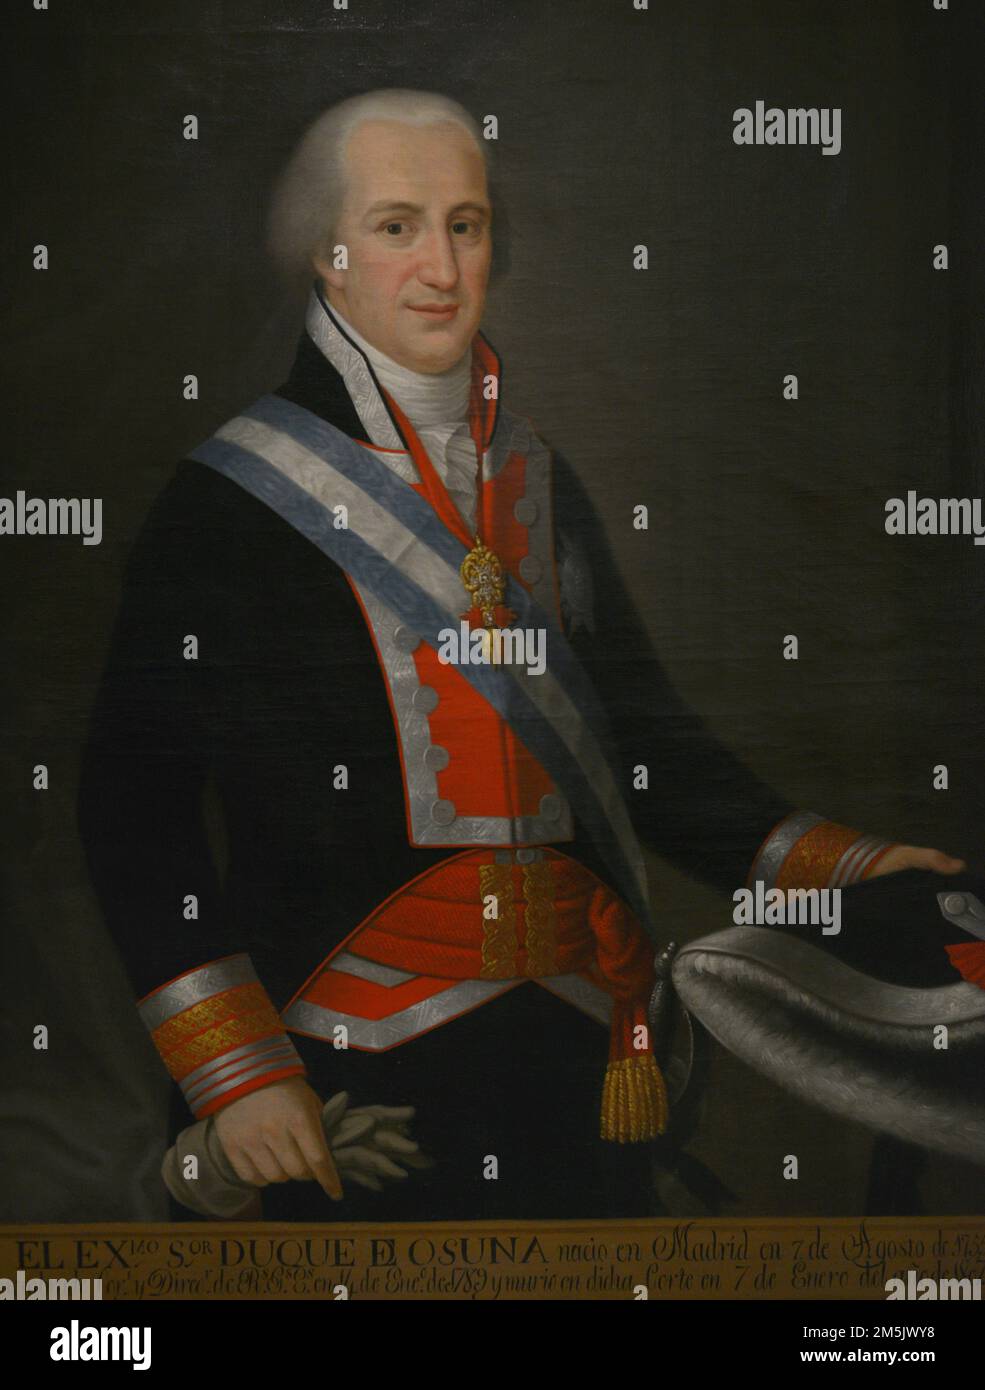 Pedro de Alcantara Tellez Giron y Pacheco (1755-1807). 9th Duke of Osuna and 10th Marquis of Peñafiel. Spanish Lieutenant General. Portrait wearing the service uniform of Colonel of the Regiment of Spanish Guards with braids corresponding to the rank of Lieutenant General. Oil on canvas. Army Museum. Toledo, Spain. Stock Photo